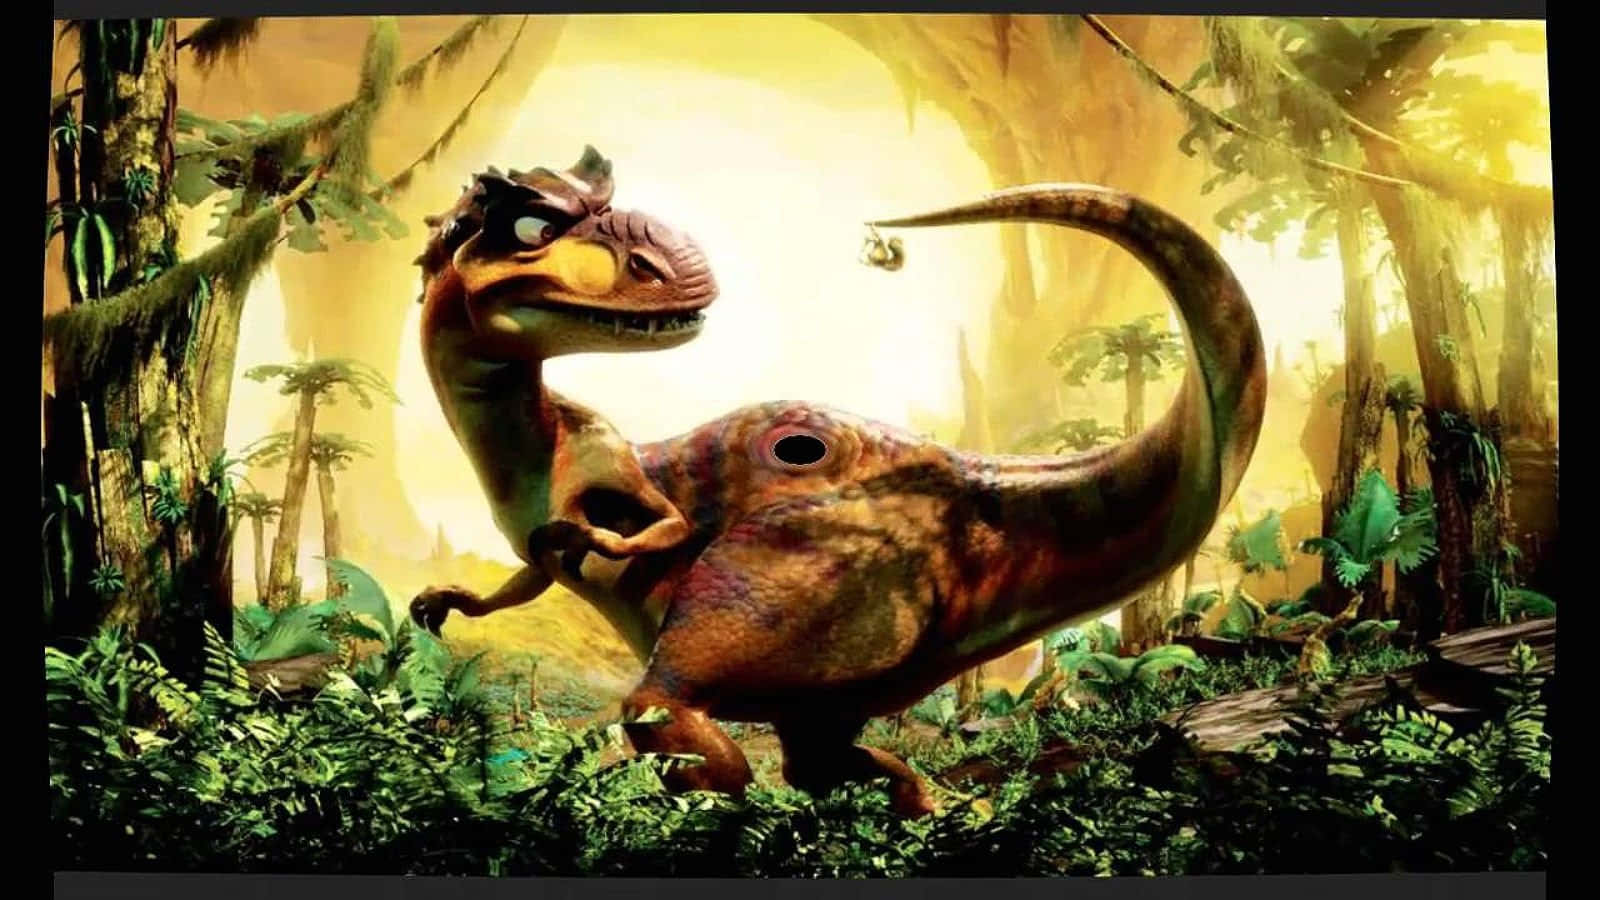 "T-Rex and Triceratops cuddle in a peaceful cartoon setting."